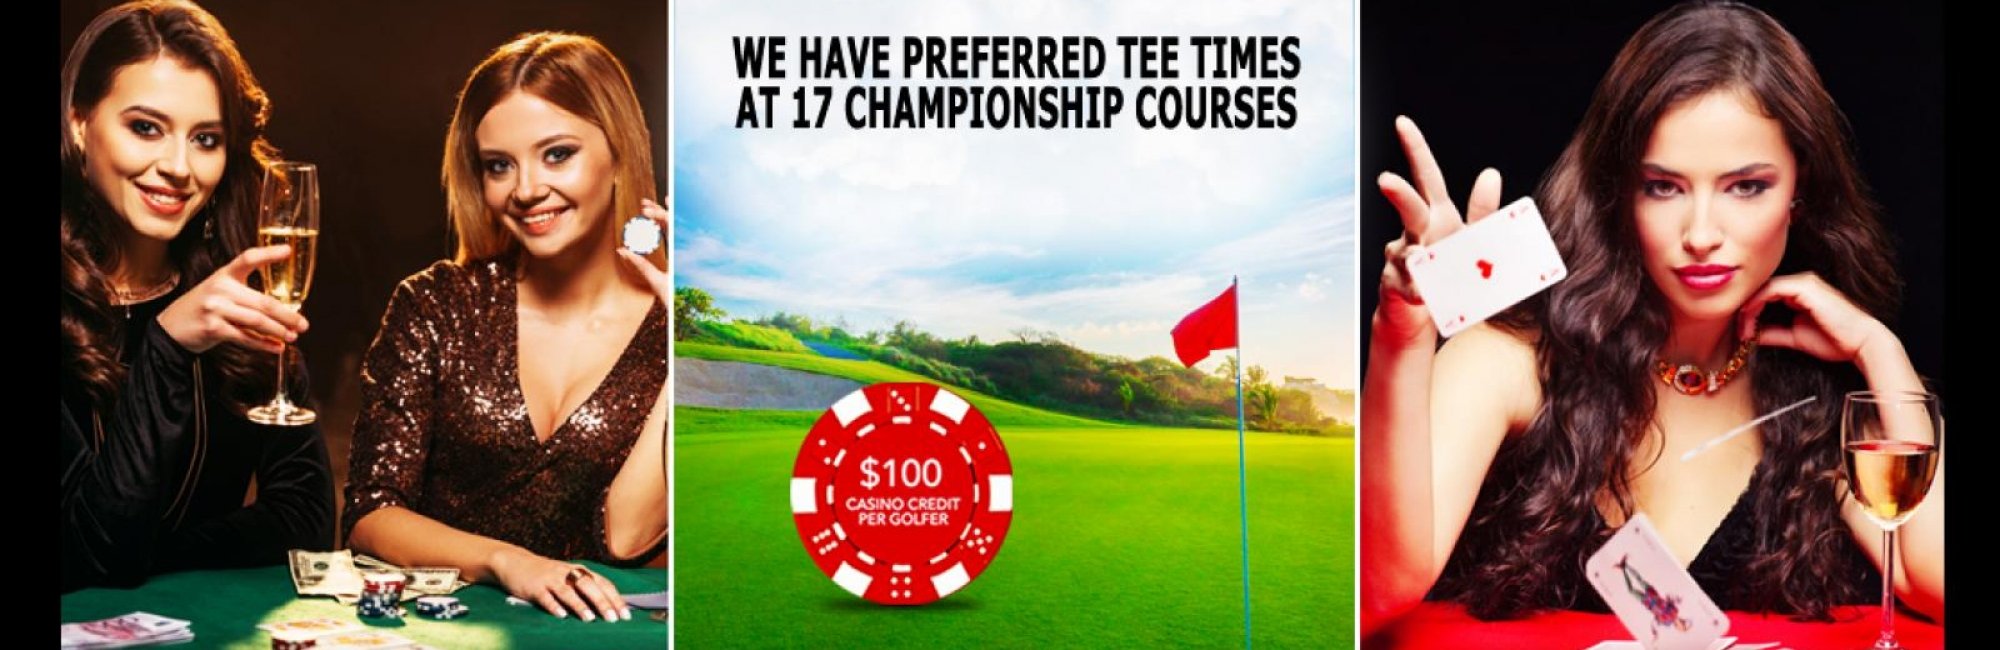 we have preferred tee times at 17 championship courses